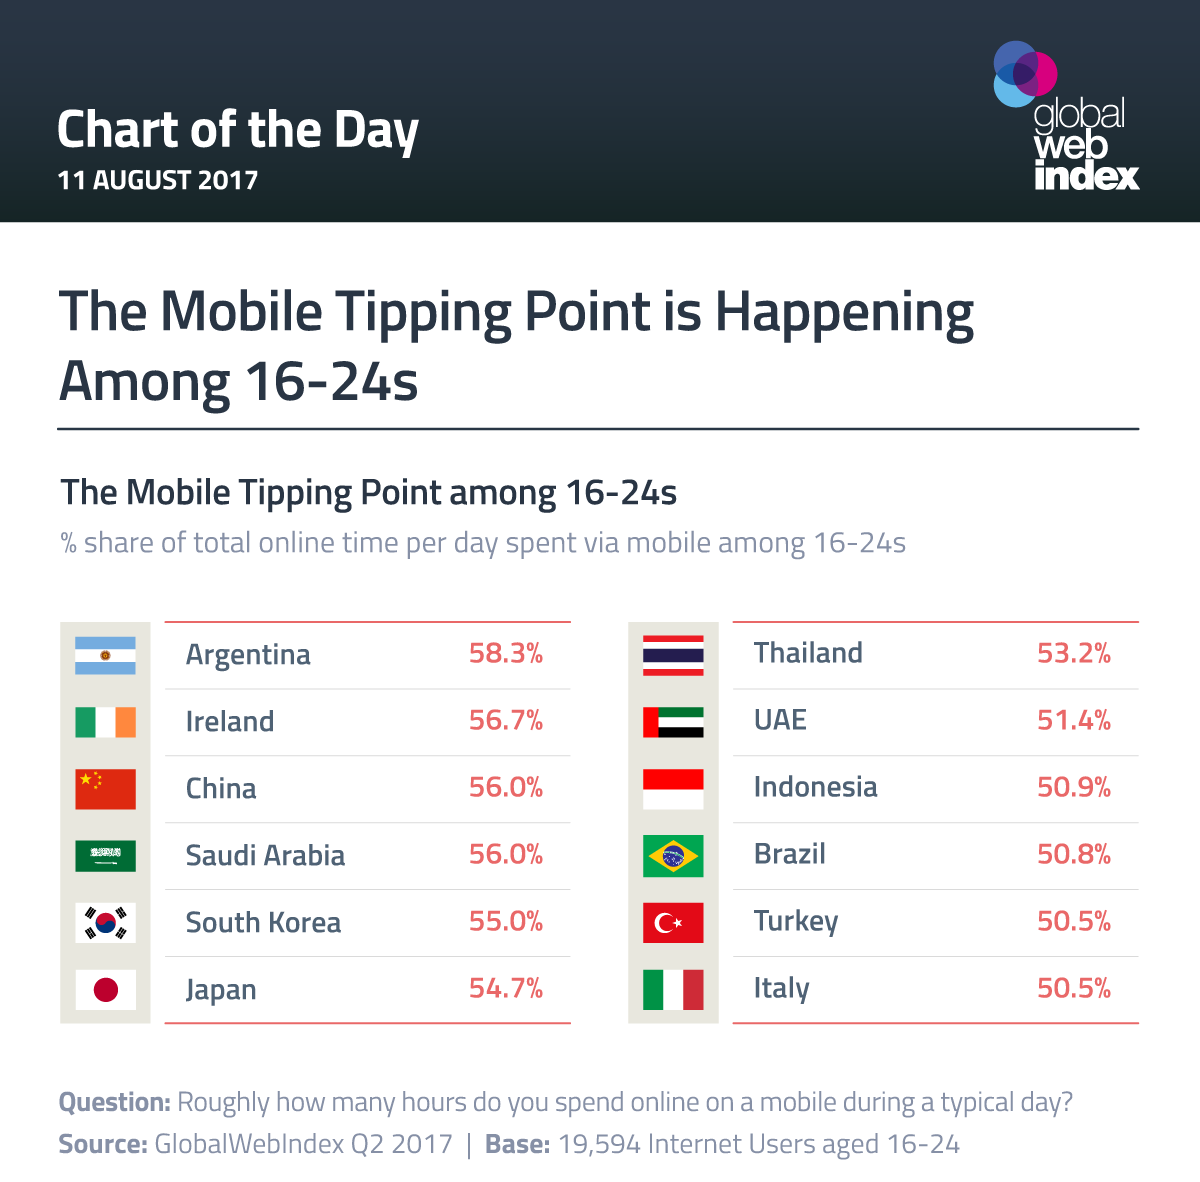 The Mobile Tipping Point is Happening Among 16-24s